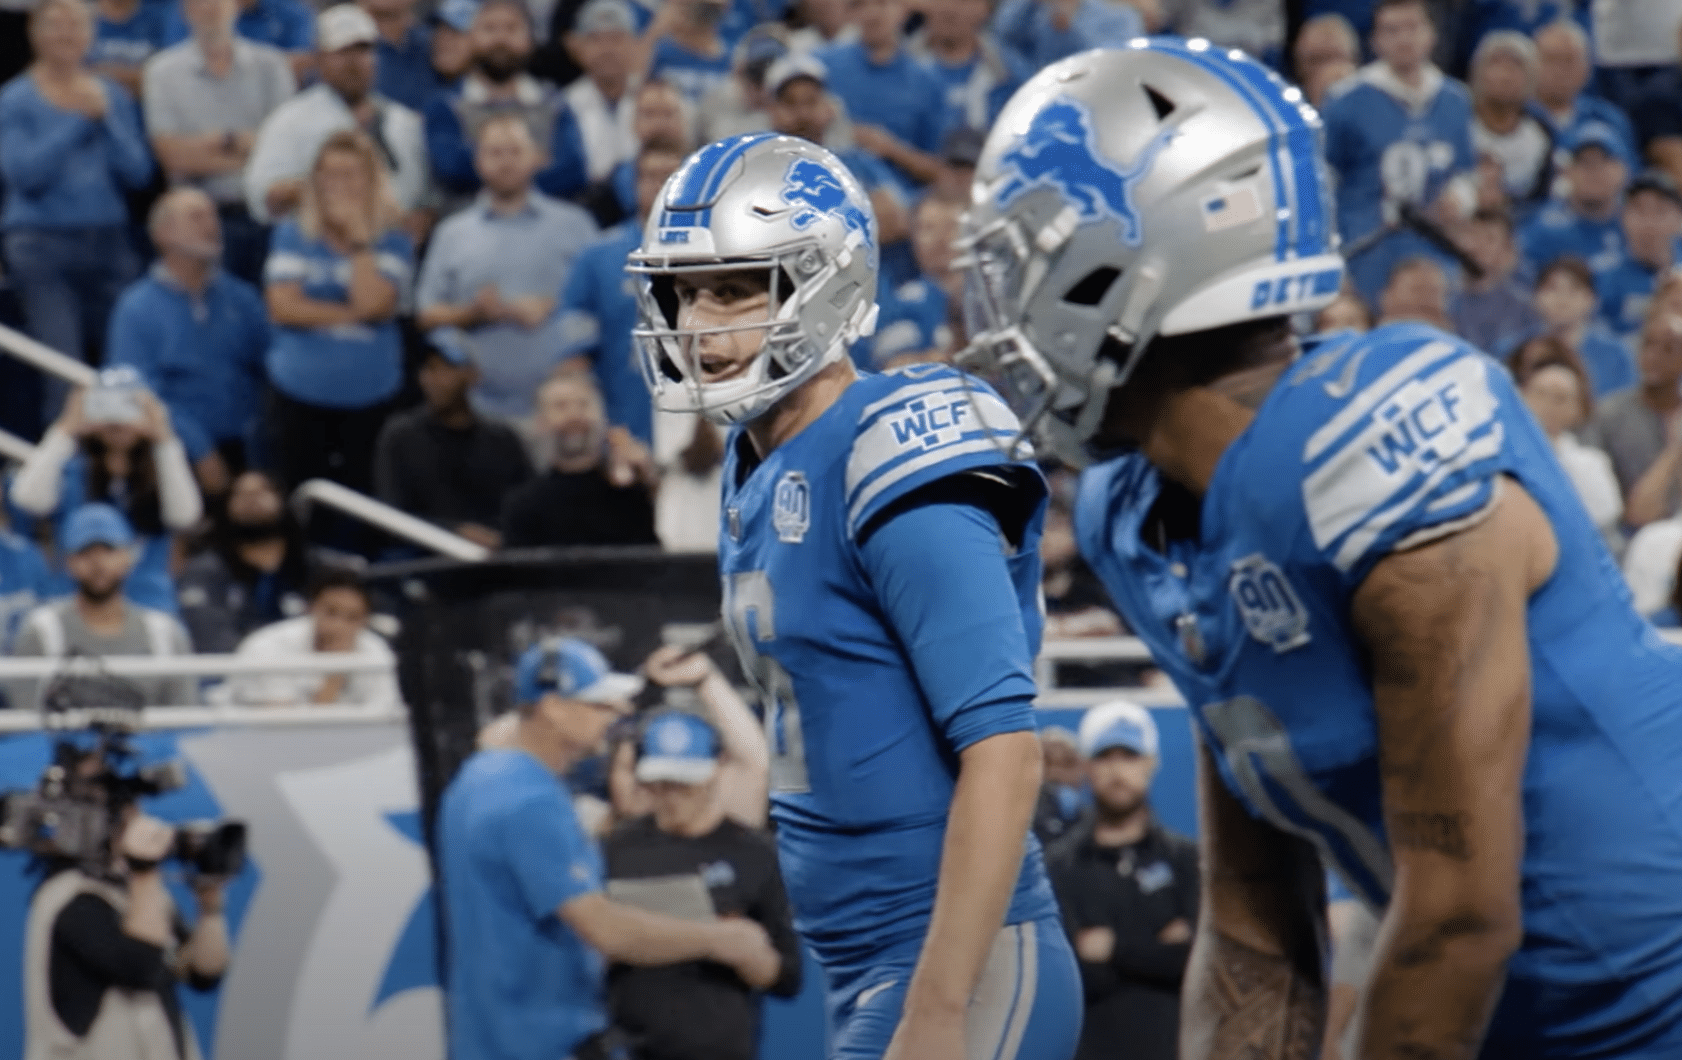 Detroit Lions starting offense Is Jared Goff An MVP Candidate Detroit Lions PFF Grades vs. Raiders Jared Goff may have to wait Update: Jared Goff Contract Extension Talks With Detroit Lions Should the Detroit Lions Rest Their Starters